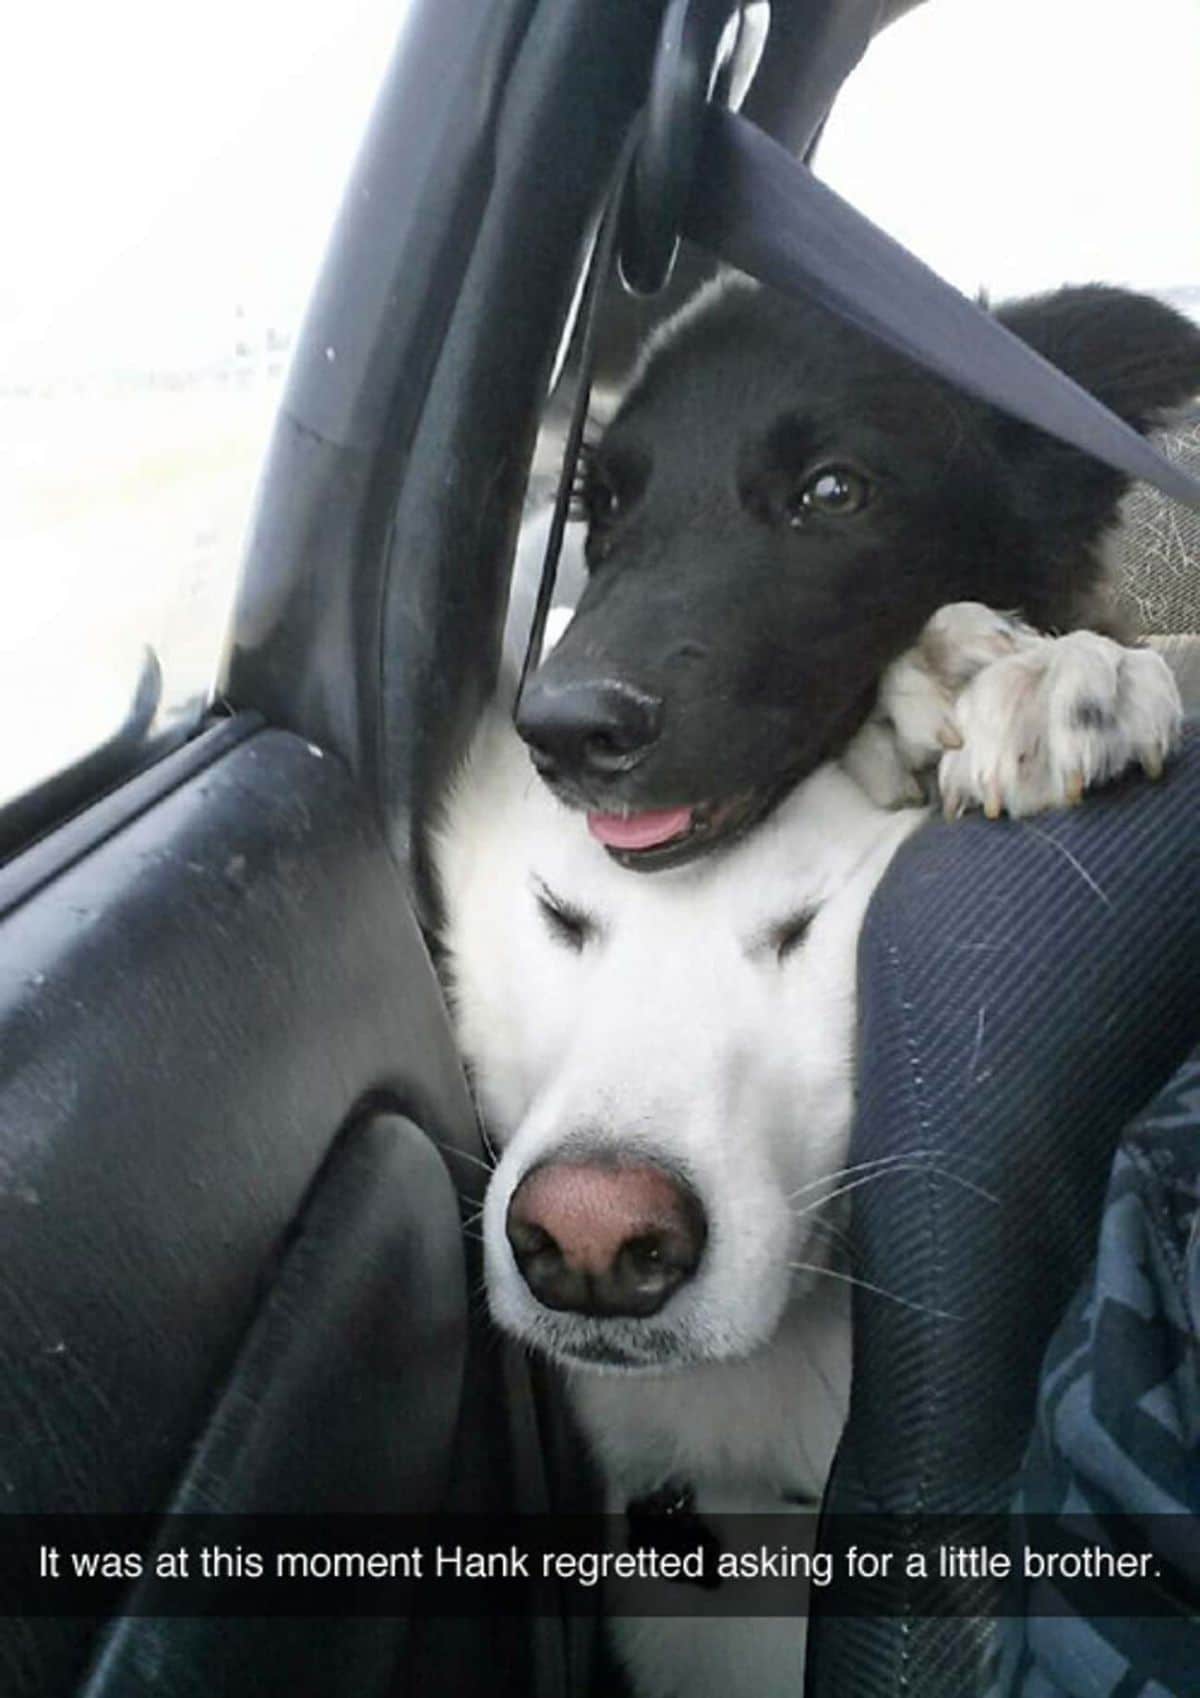 white dog's face between a car seat and door with black and white dog placing head on the dog with the caption It was at this moment Hank regretted asking for a little brother